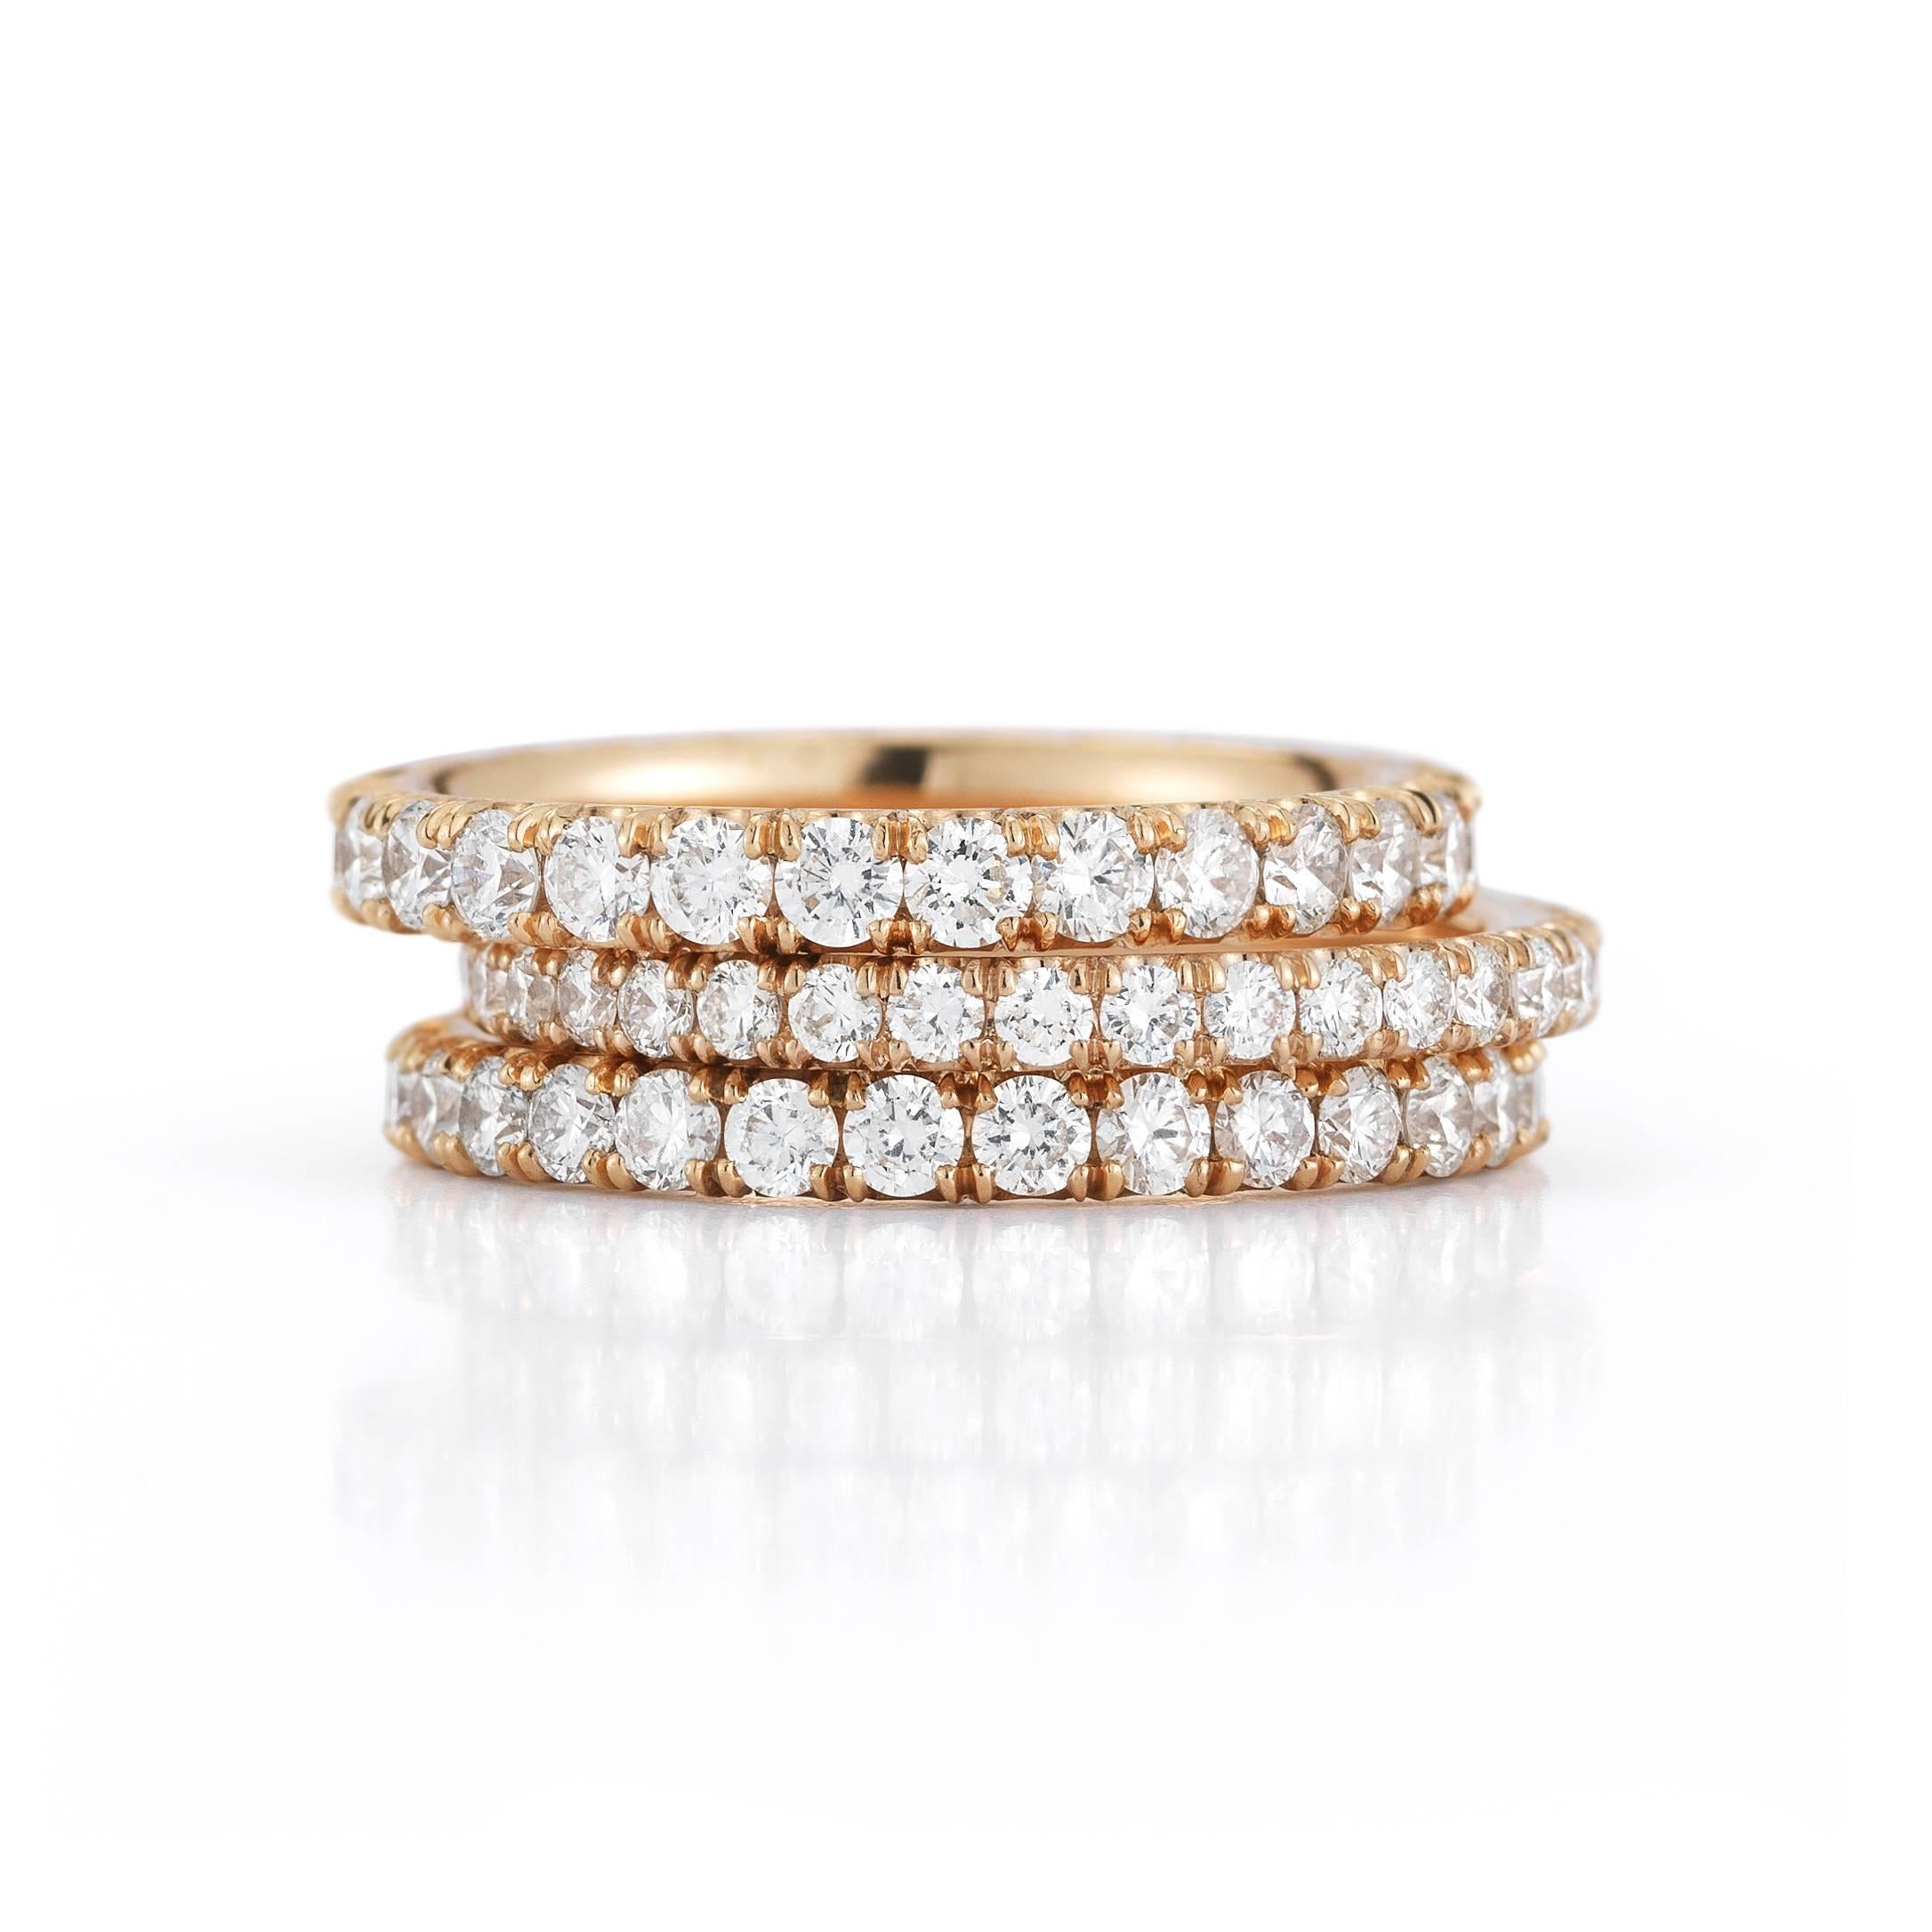 This diamond eternity band makes an ideal wedding band. The perfect ring made with expert craftsmanship is sleek and streamlined from every point of view. Each one point diamond is carefully set into a solid metal ring by a master stone setter,